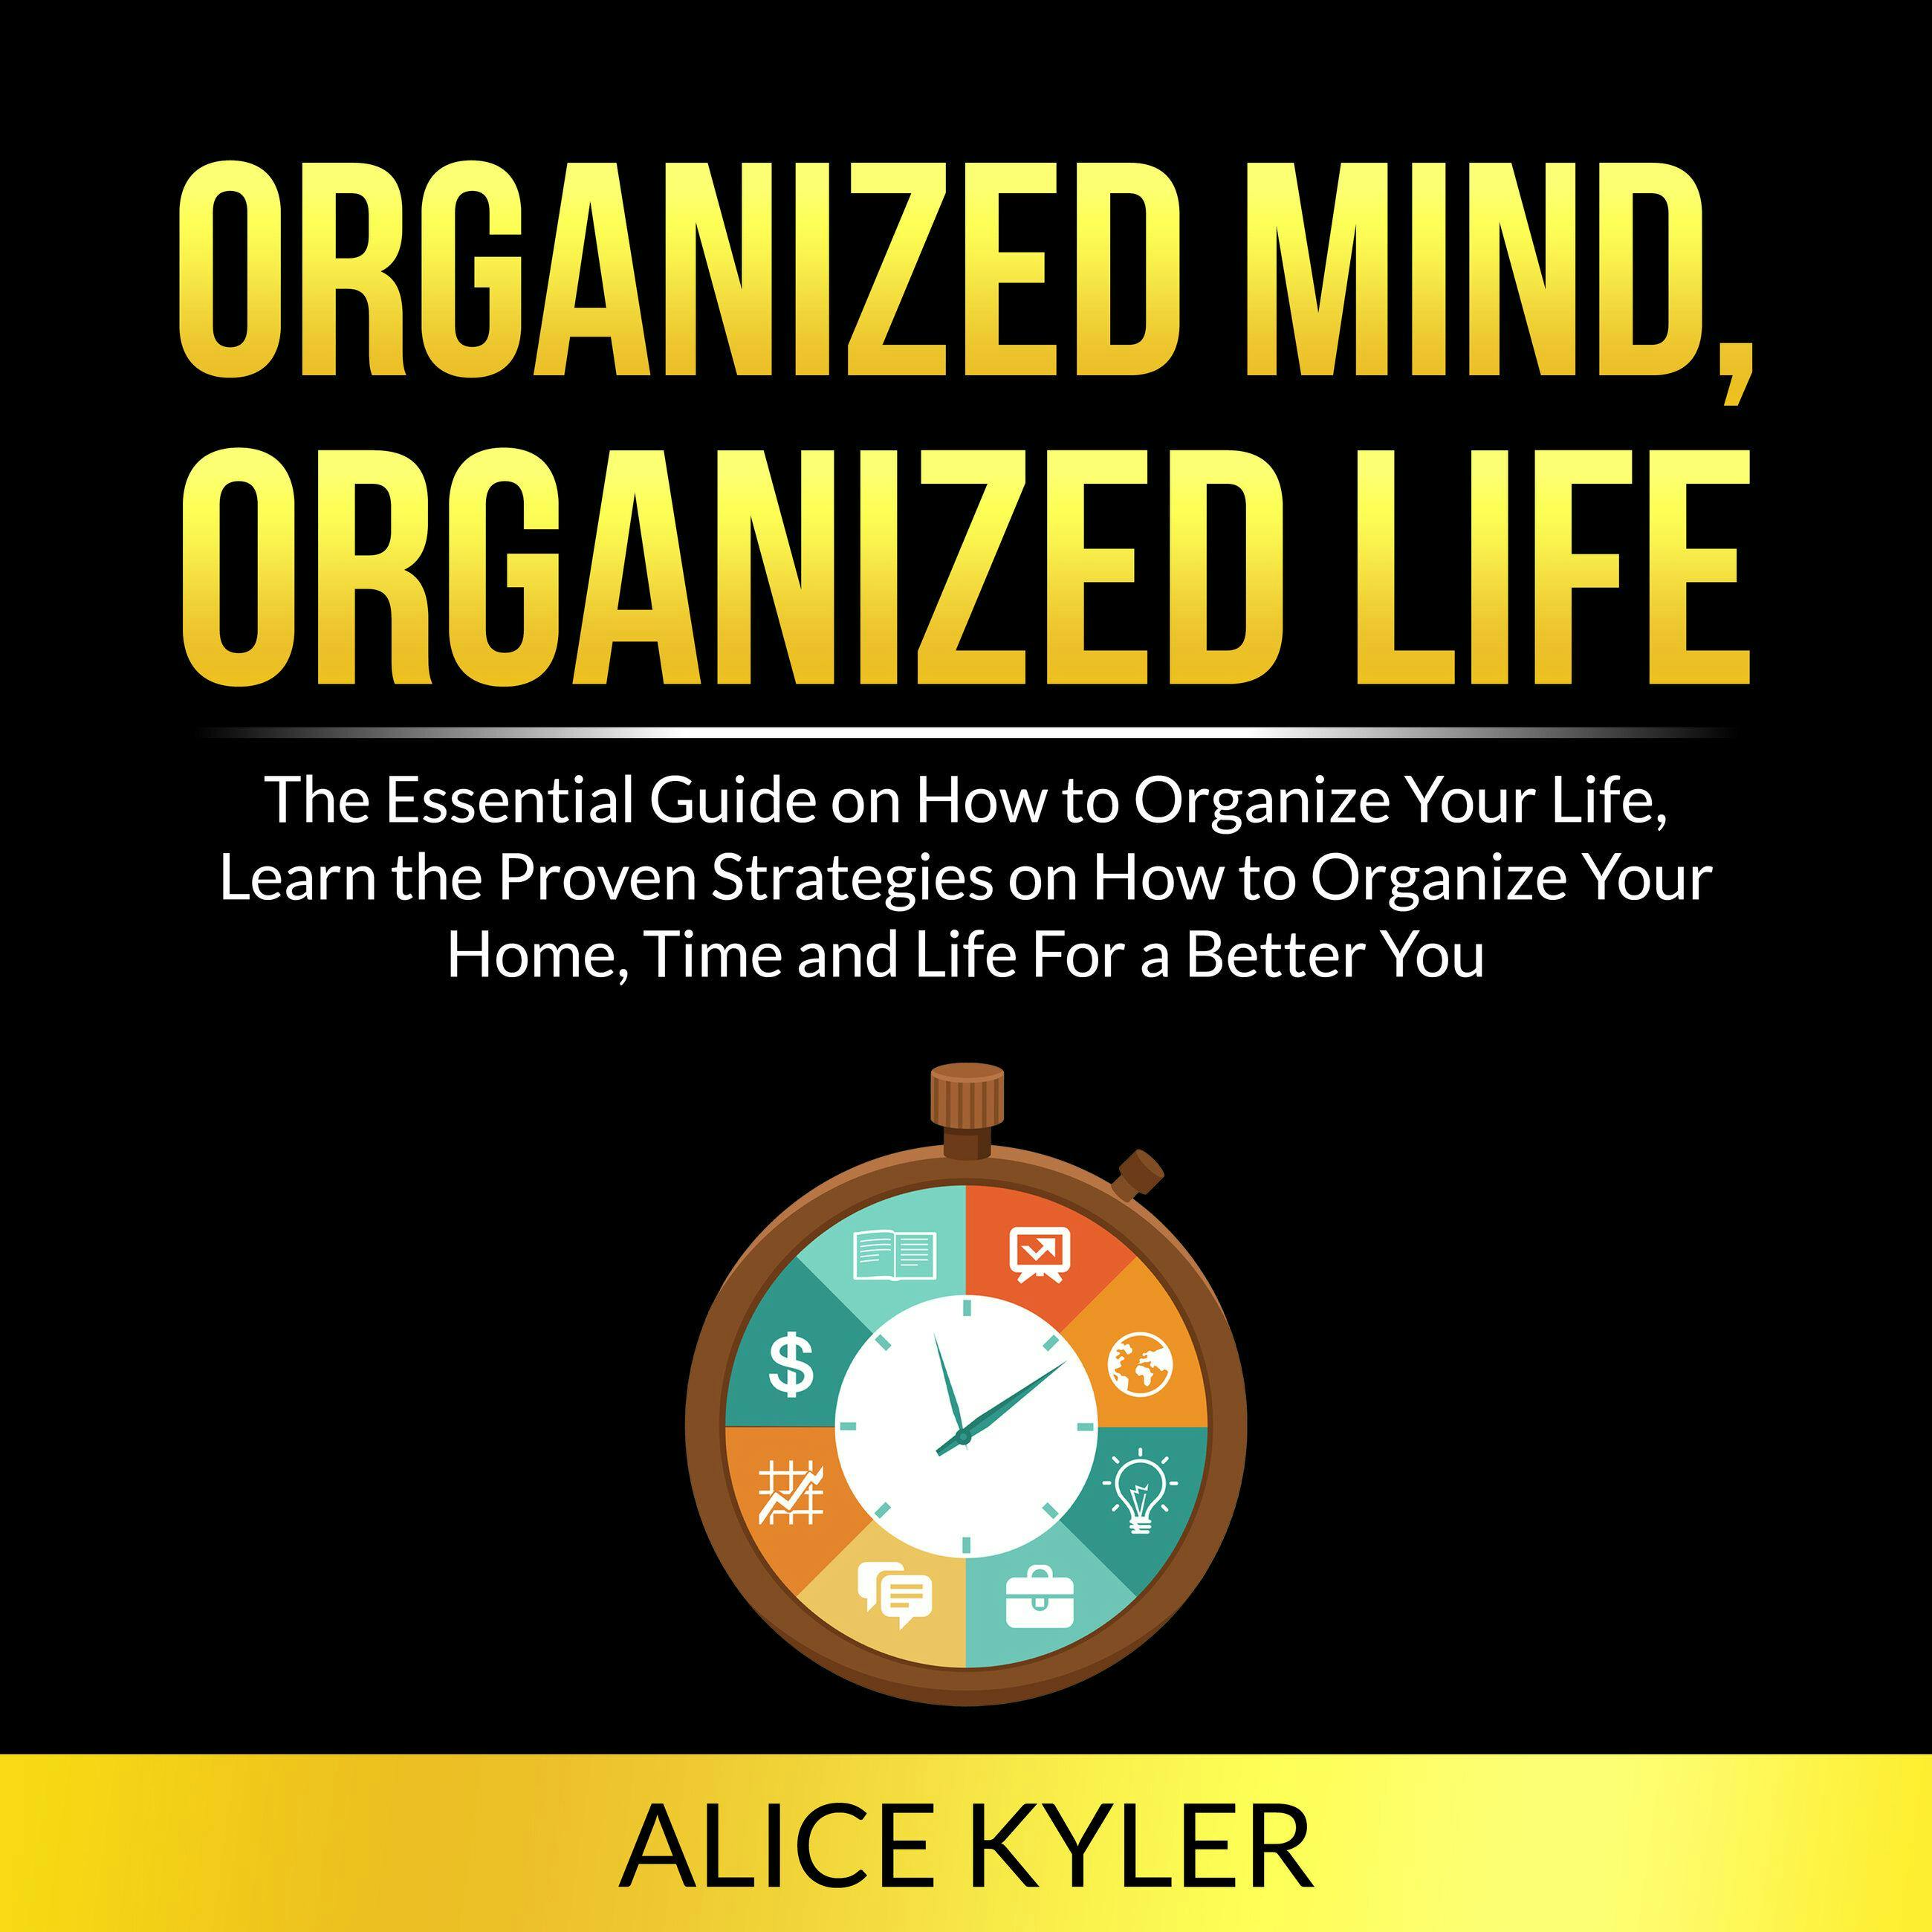 Organized Mind, Organized Life: The Essential Guide on How to Organize Your Life, Learn the Proven Strategies on How to Organize Your Home, Time and Life For a Better You - Alice Kyler